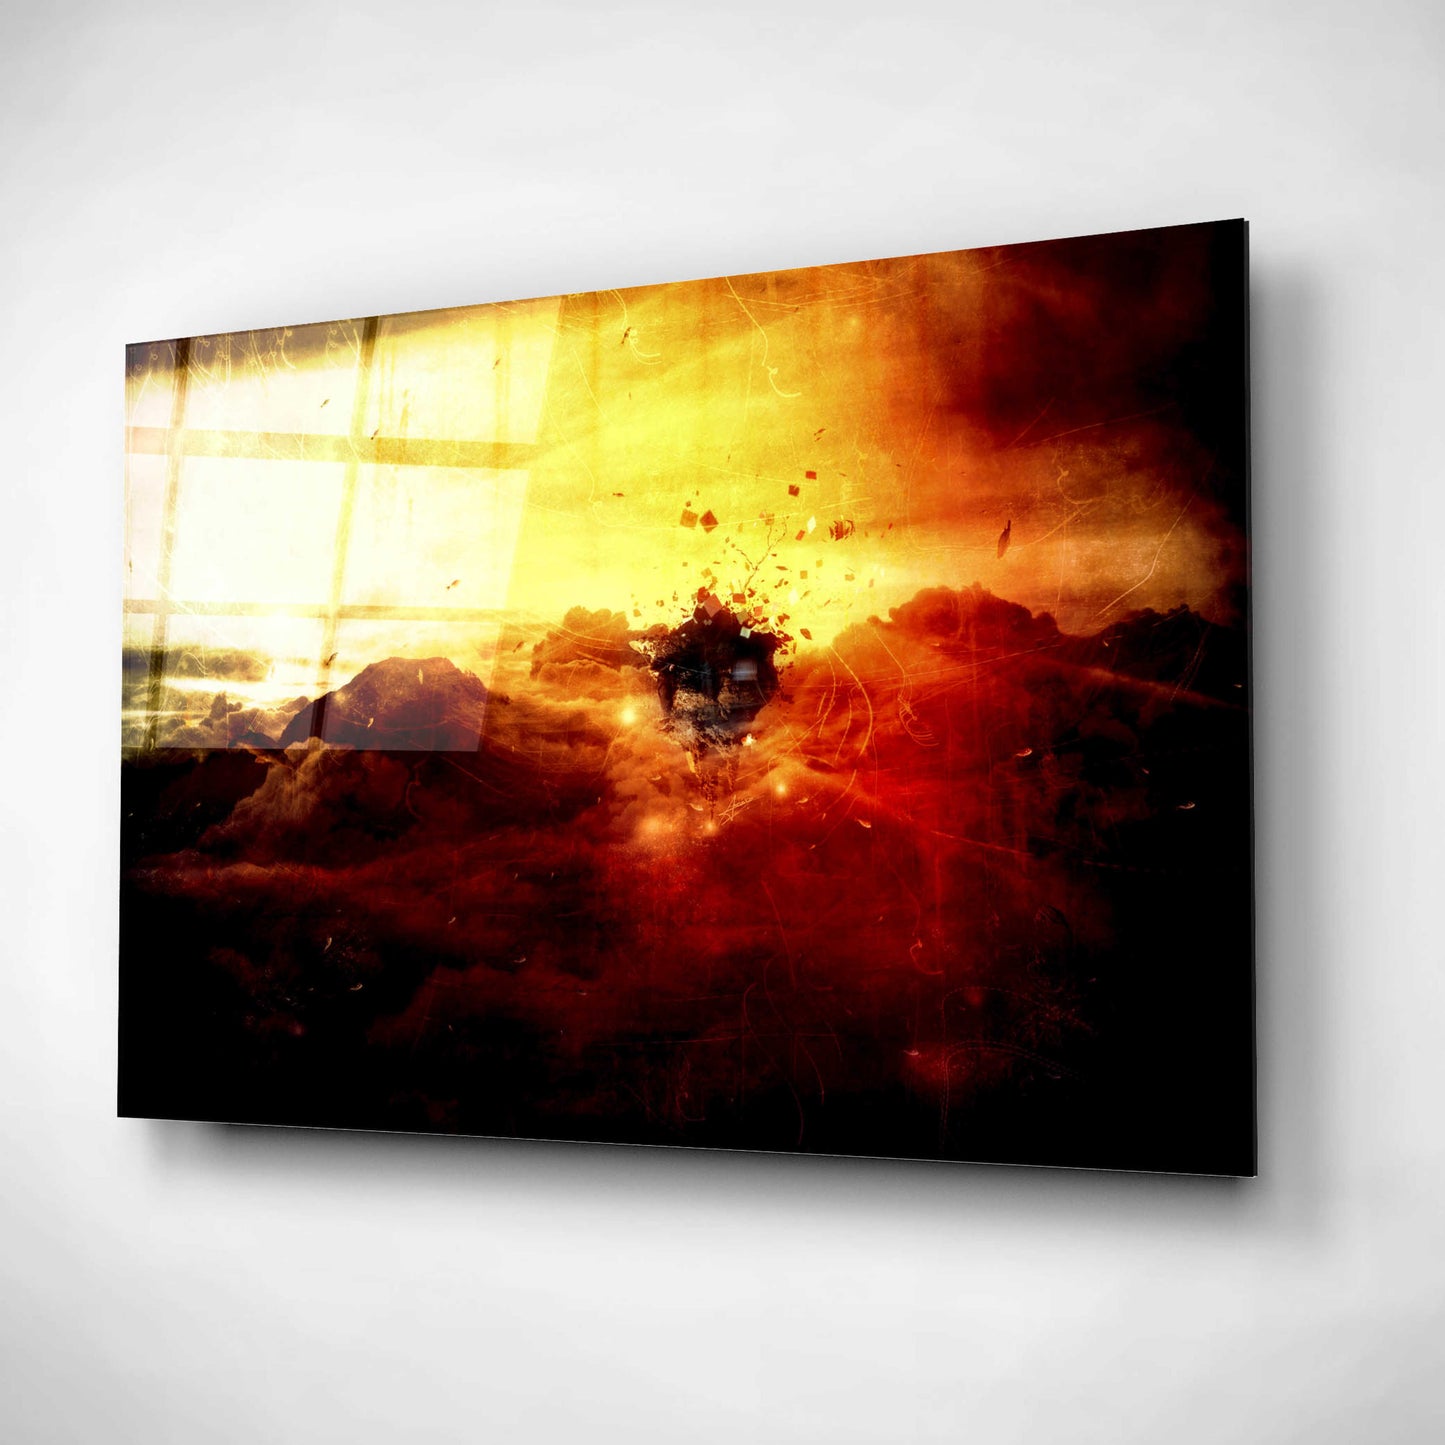 Epic Art 'Are You There' by Mario Sanchez Nevado, Acrylic Glass Wall Art,12x16